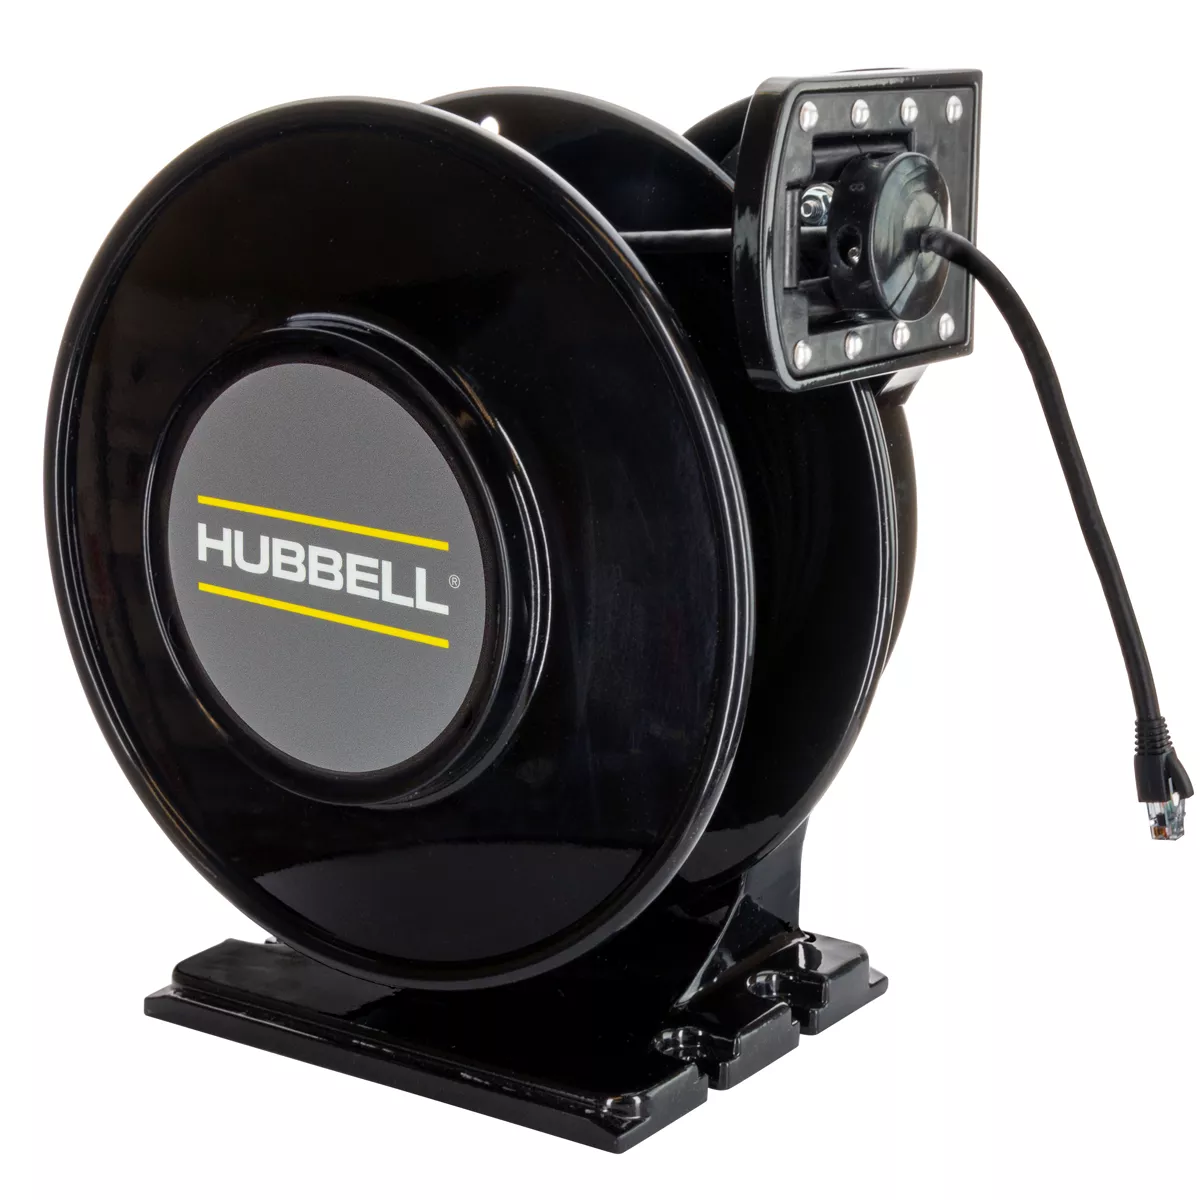 Hubbell ACA16325-HL Industrial Duty Cord Reel with Incandescent Hand Lamp -  16/3c x 25', Aluminum